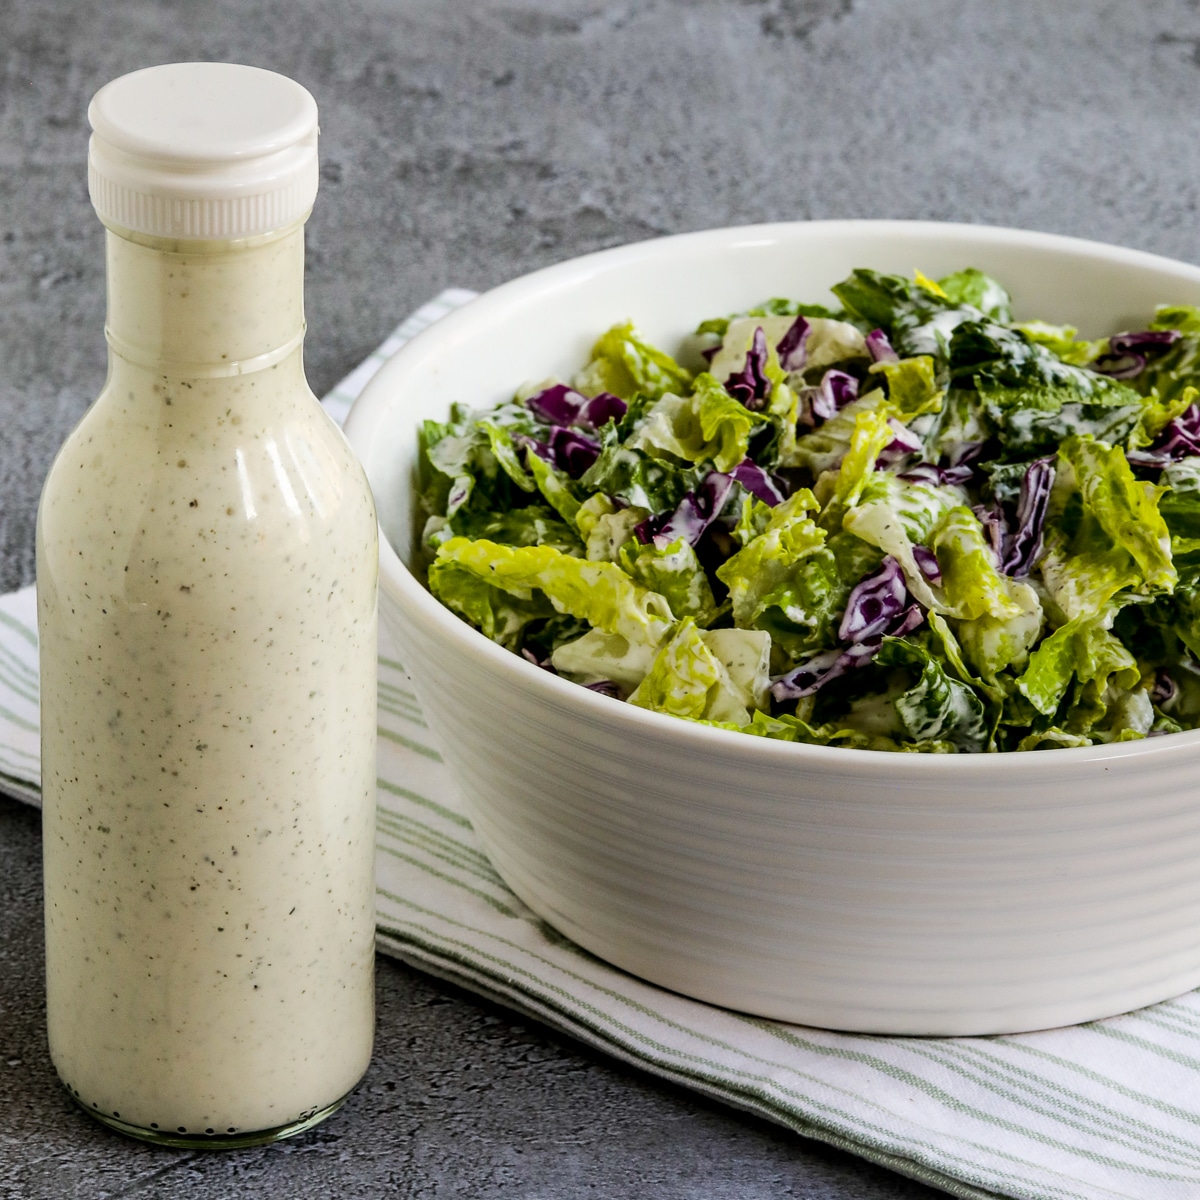 Square image for BYU Creamery Ranch Dressing (Copycat Recipe) showing dressing in bottle with salad next to it.